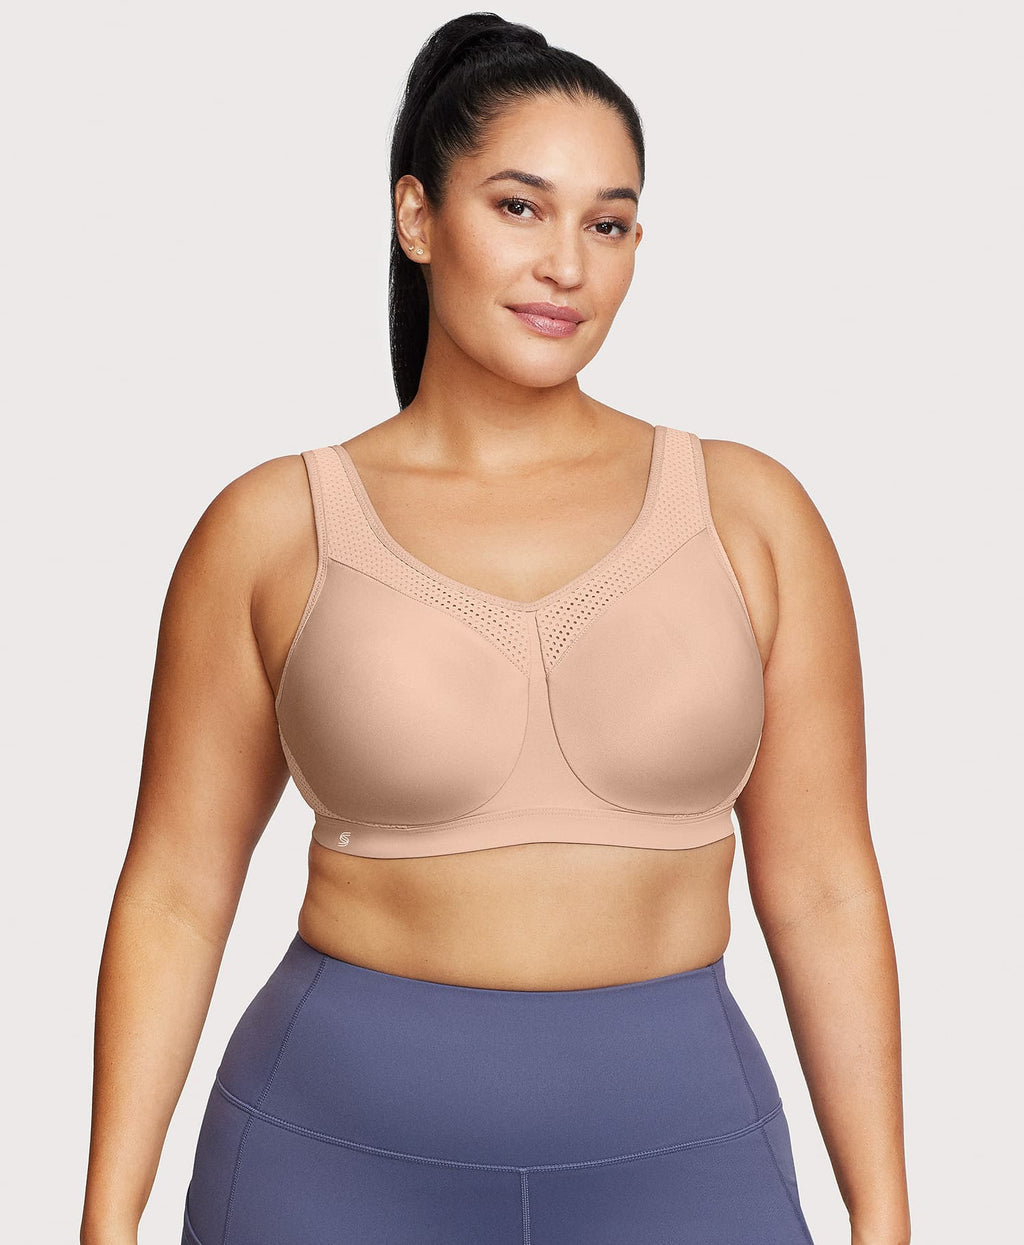 Stacey 36DD  Best high impact sports bra for large breasted